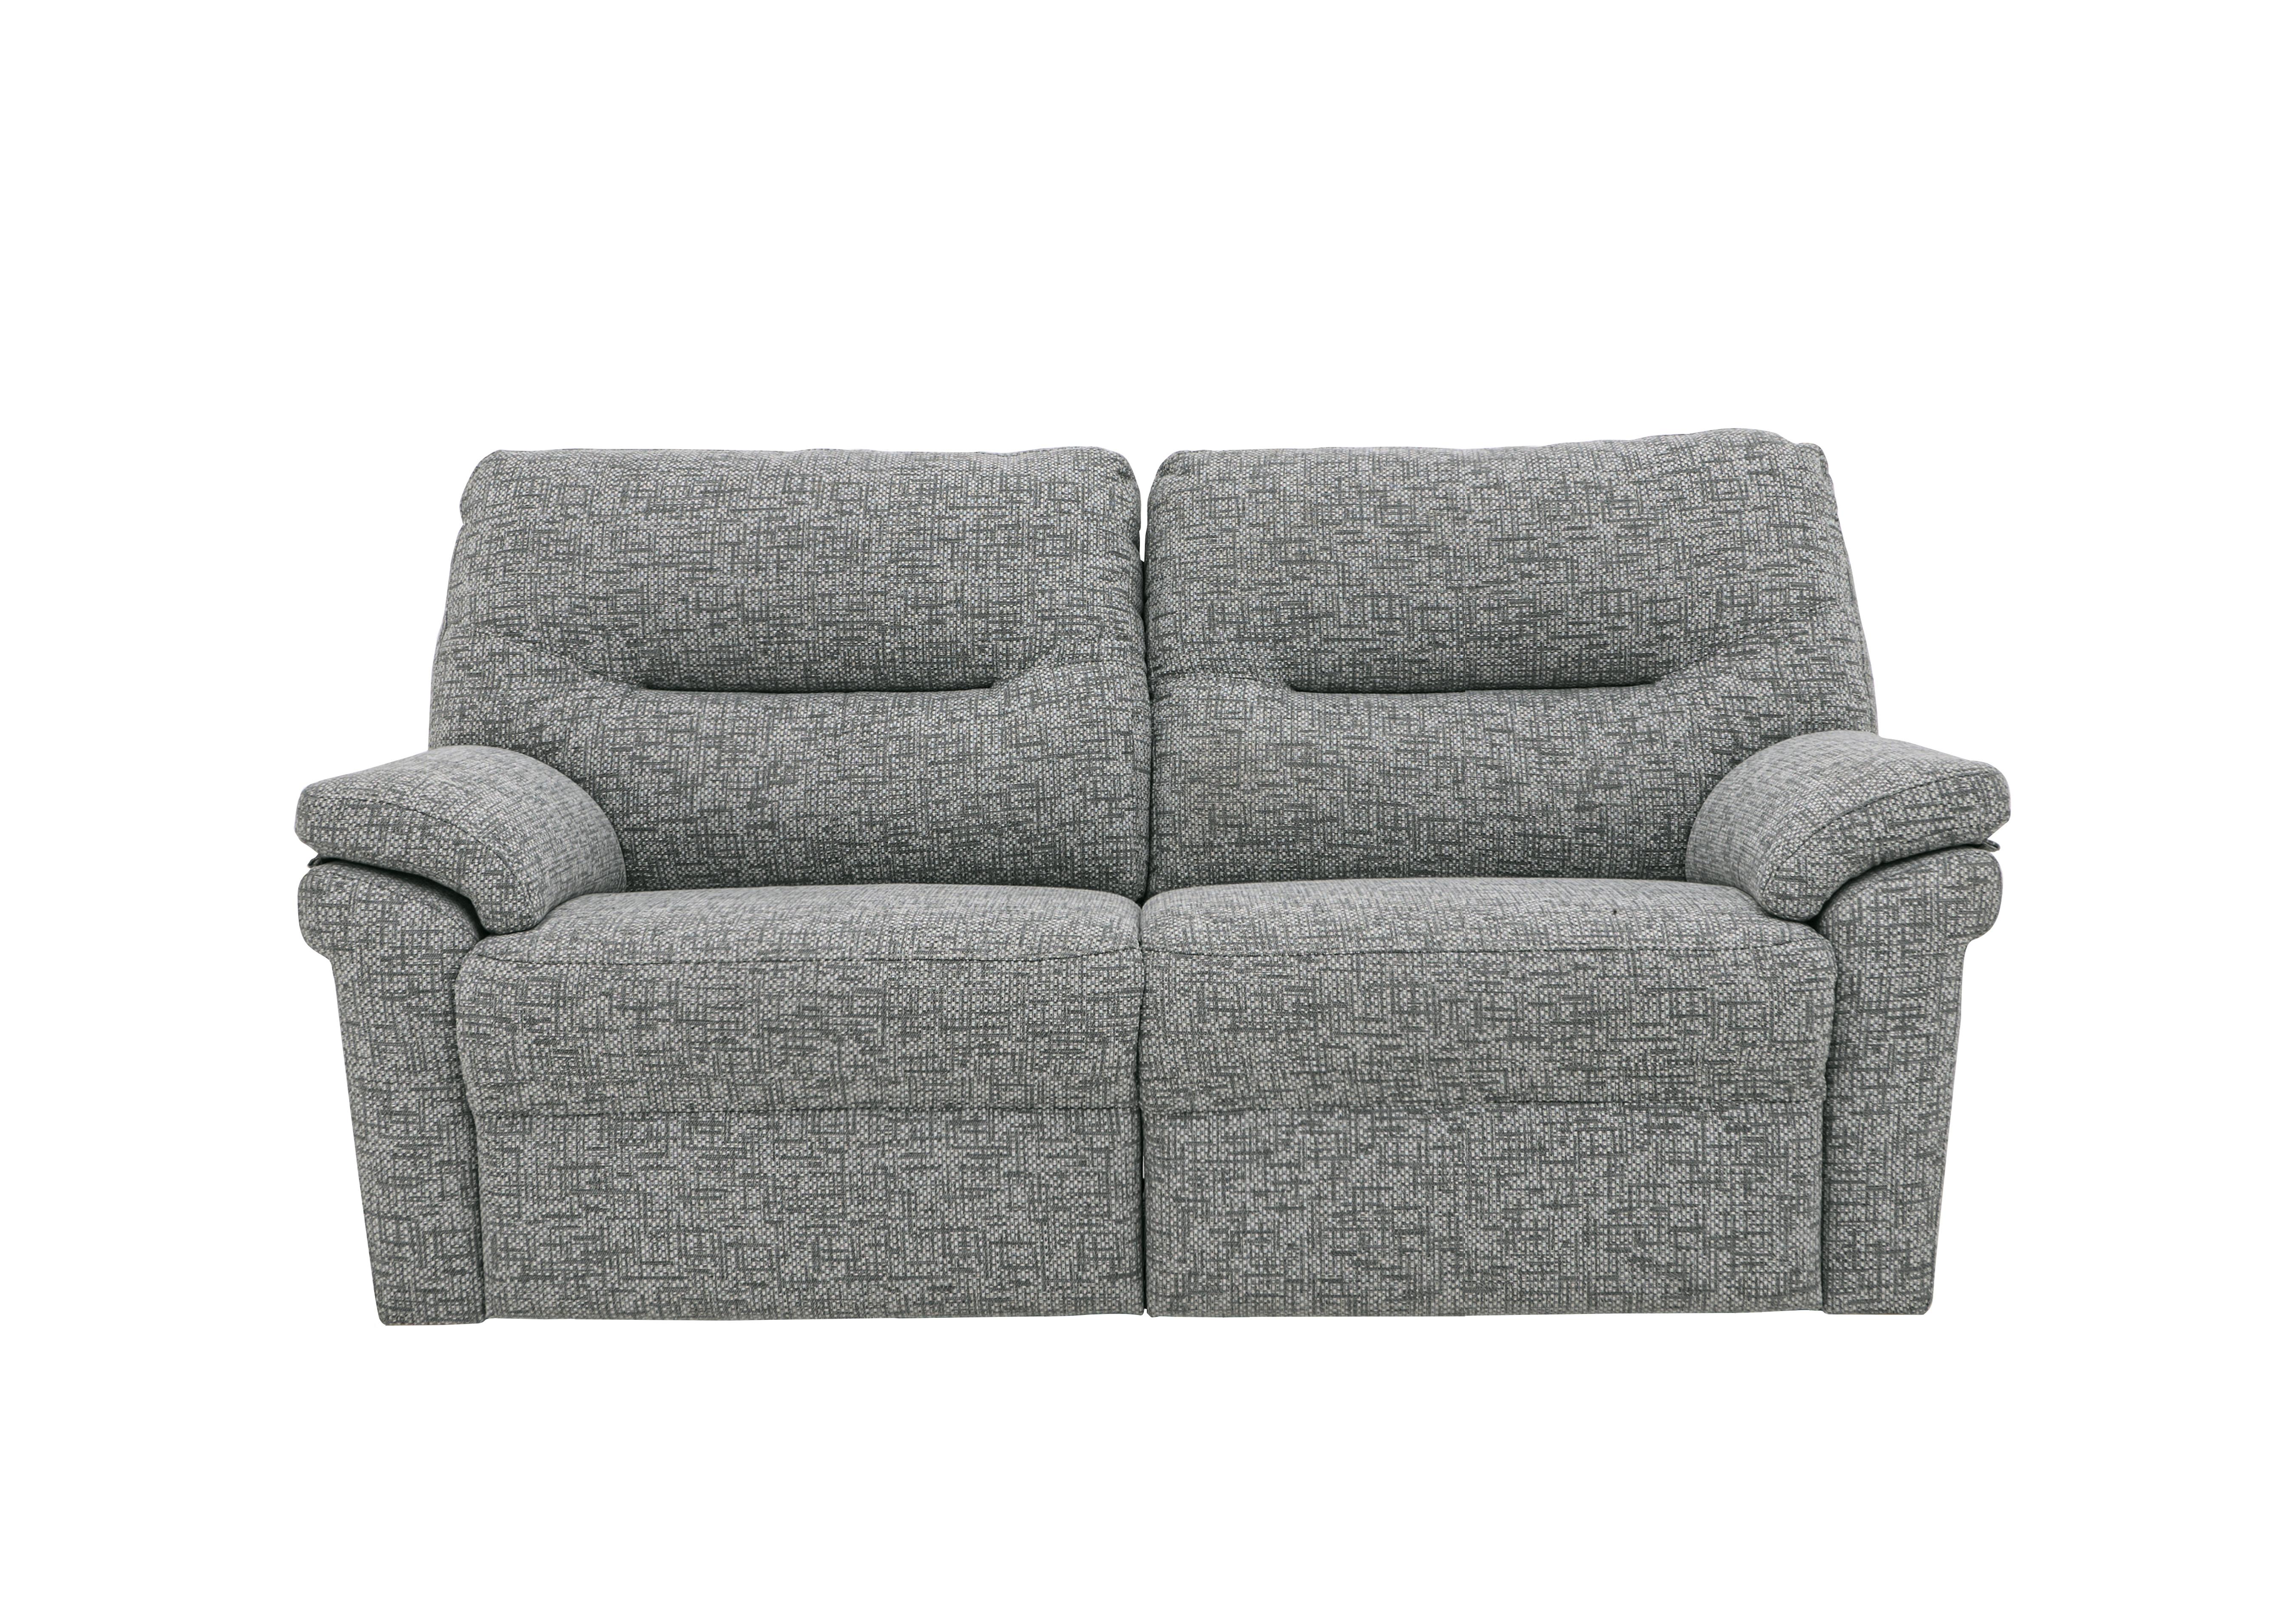 Seattle 2.5 Seater Fabric Power Recliner Sofa with Power Lumbar in B030 Remco Light Grey on Furniture Village